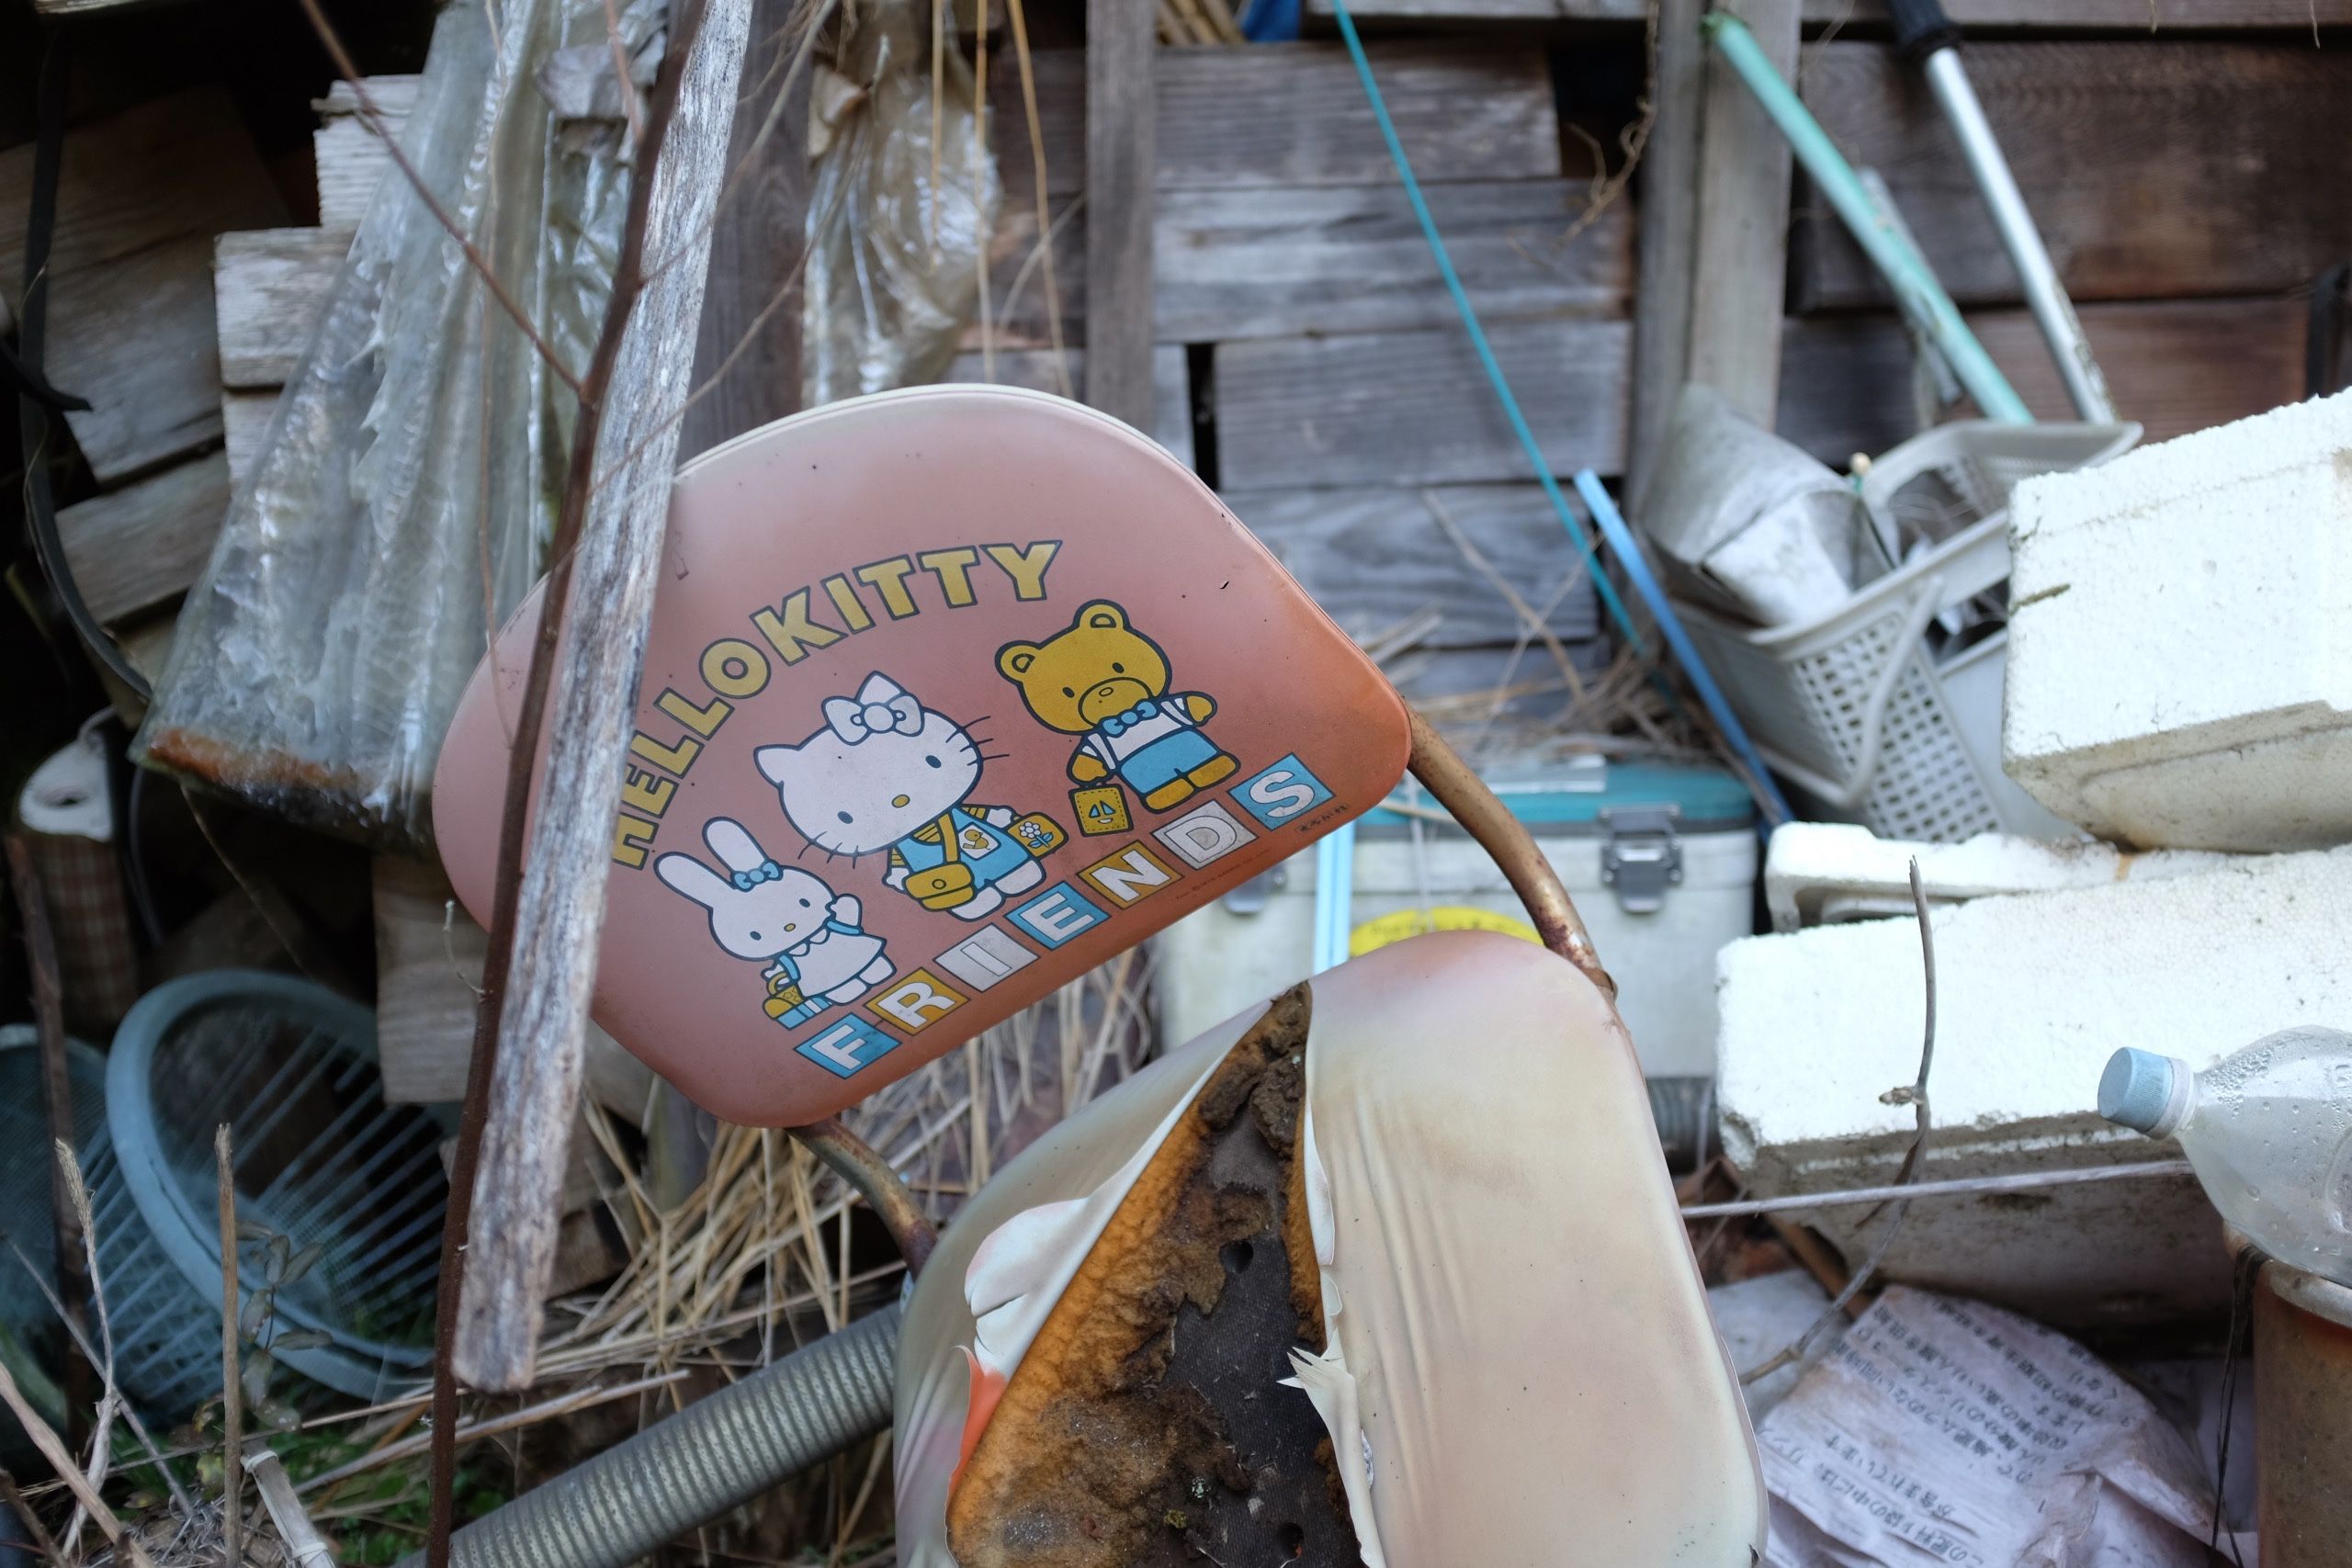 A half-burned chair that says Hello Kitty Friends, showing Hello Kitty and her friends, in a trash-filled shed.